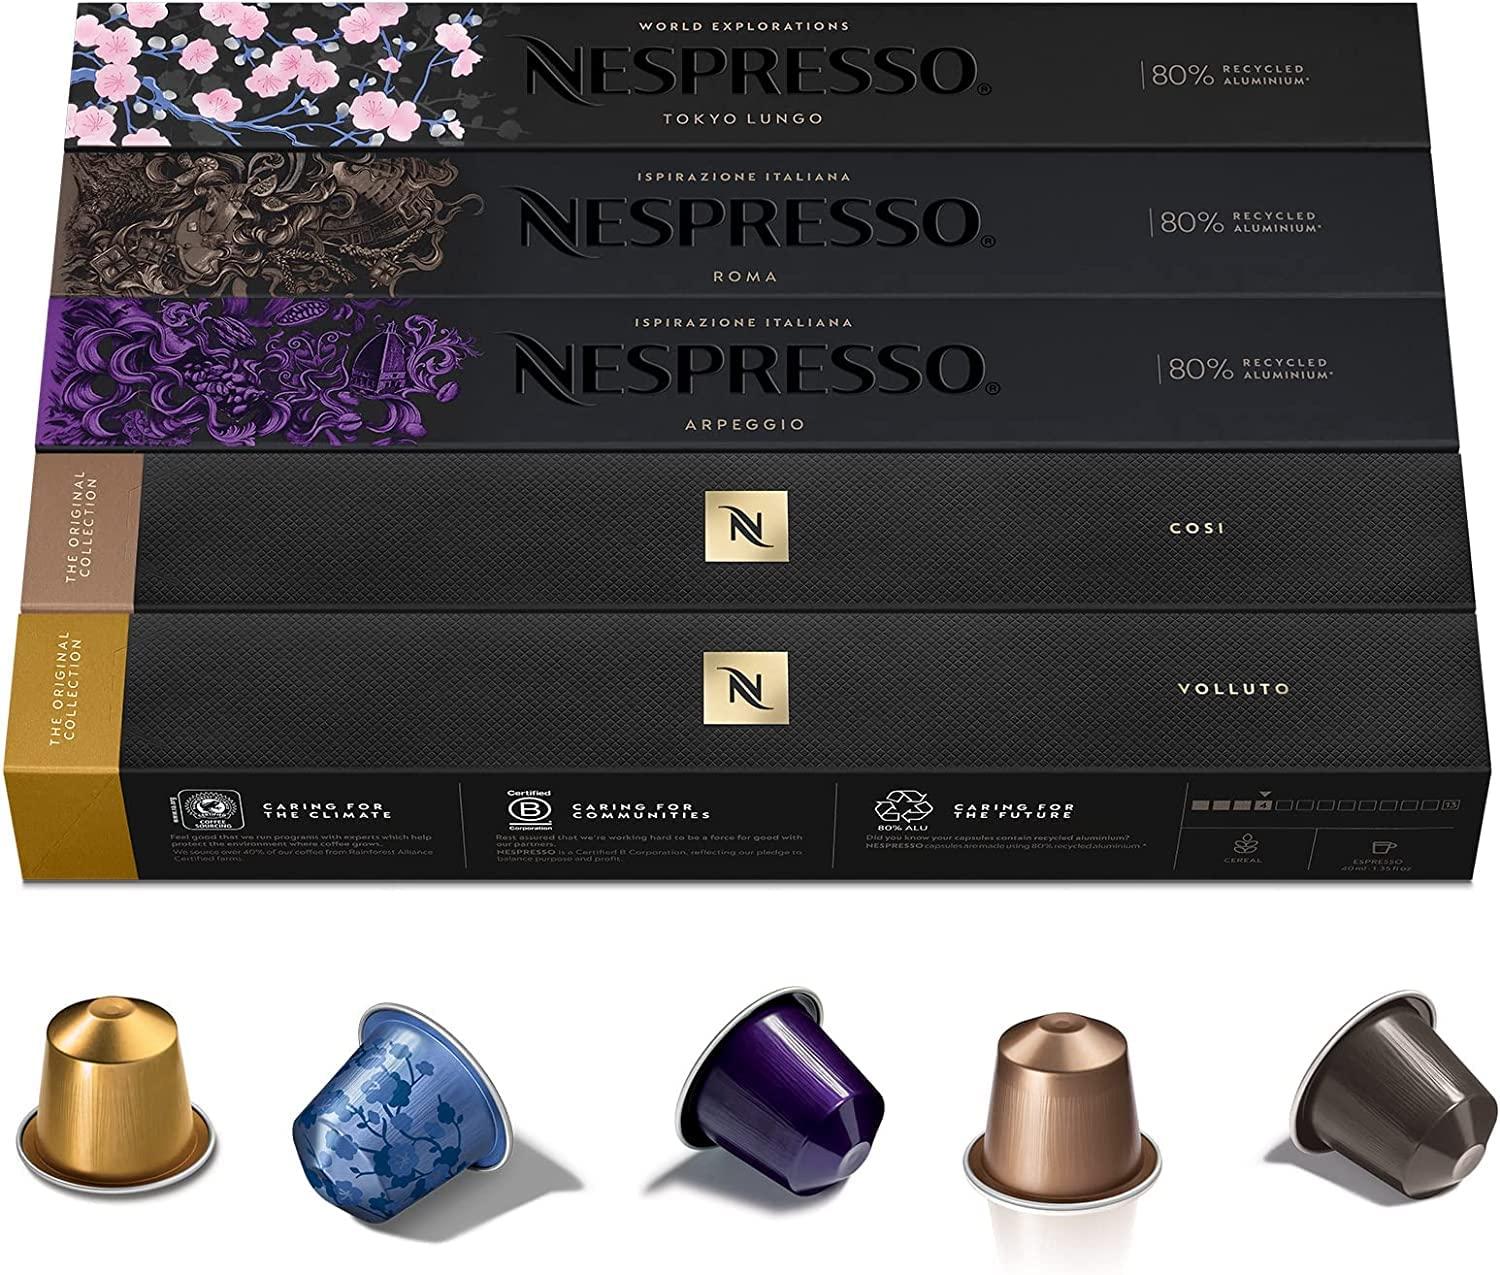 Buy $40 in Nespresso Coffee Capsules and get $10 Credit for Amazon